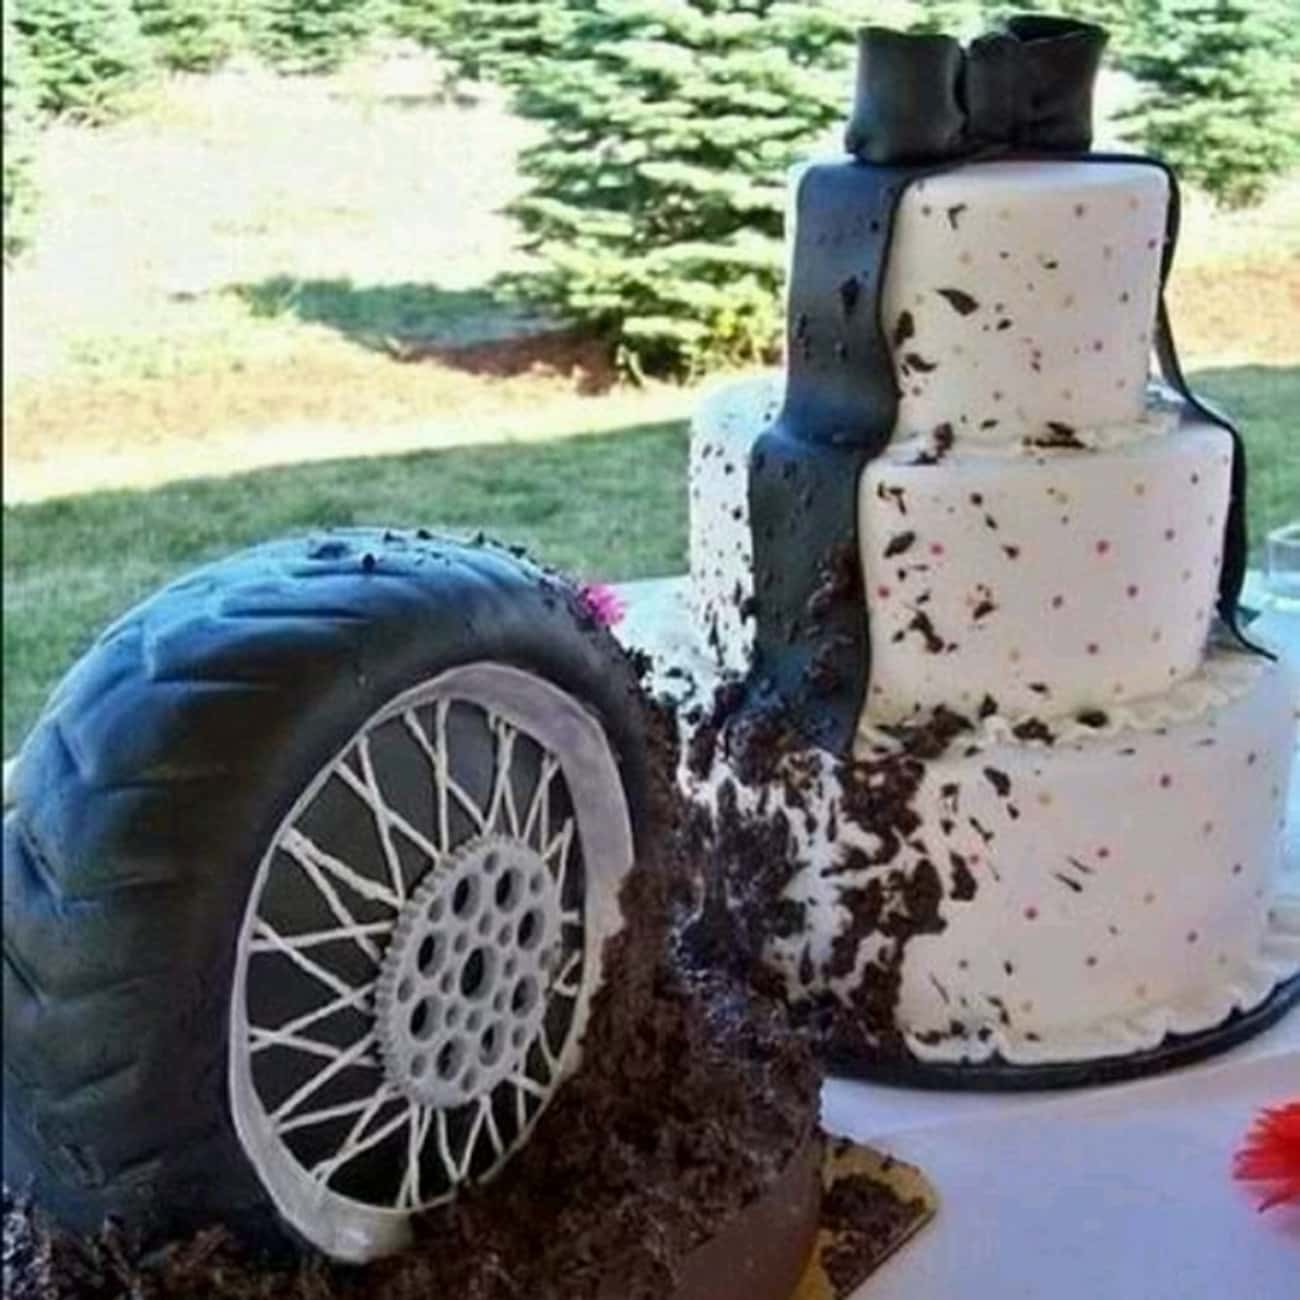 The Classiest His And Hers Wedding Cakes In Five Counties